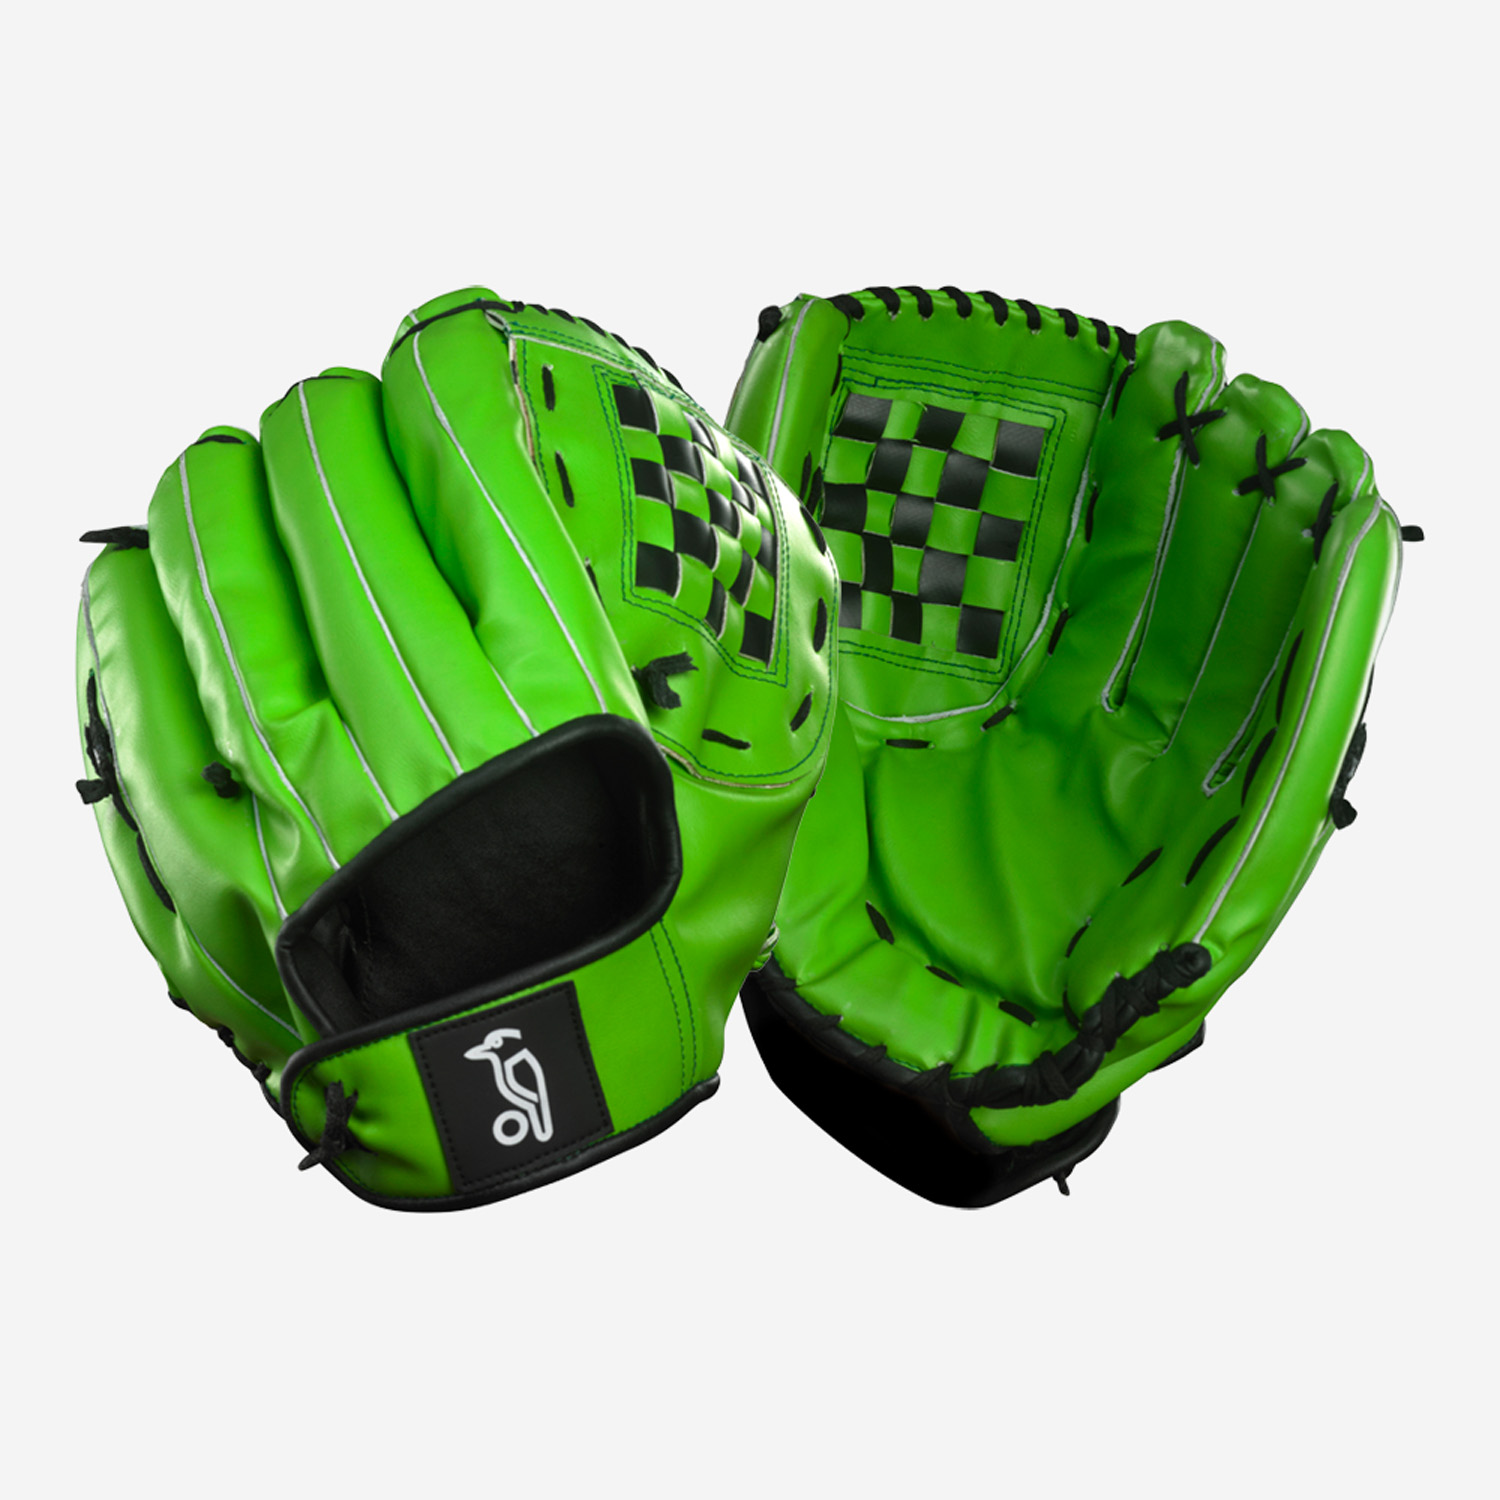 – Senior Cricket Glove For Fielding Drills FORTRESS Cricket Catching Mitt Left Or Right Handed